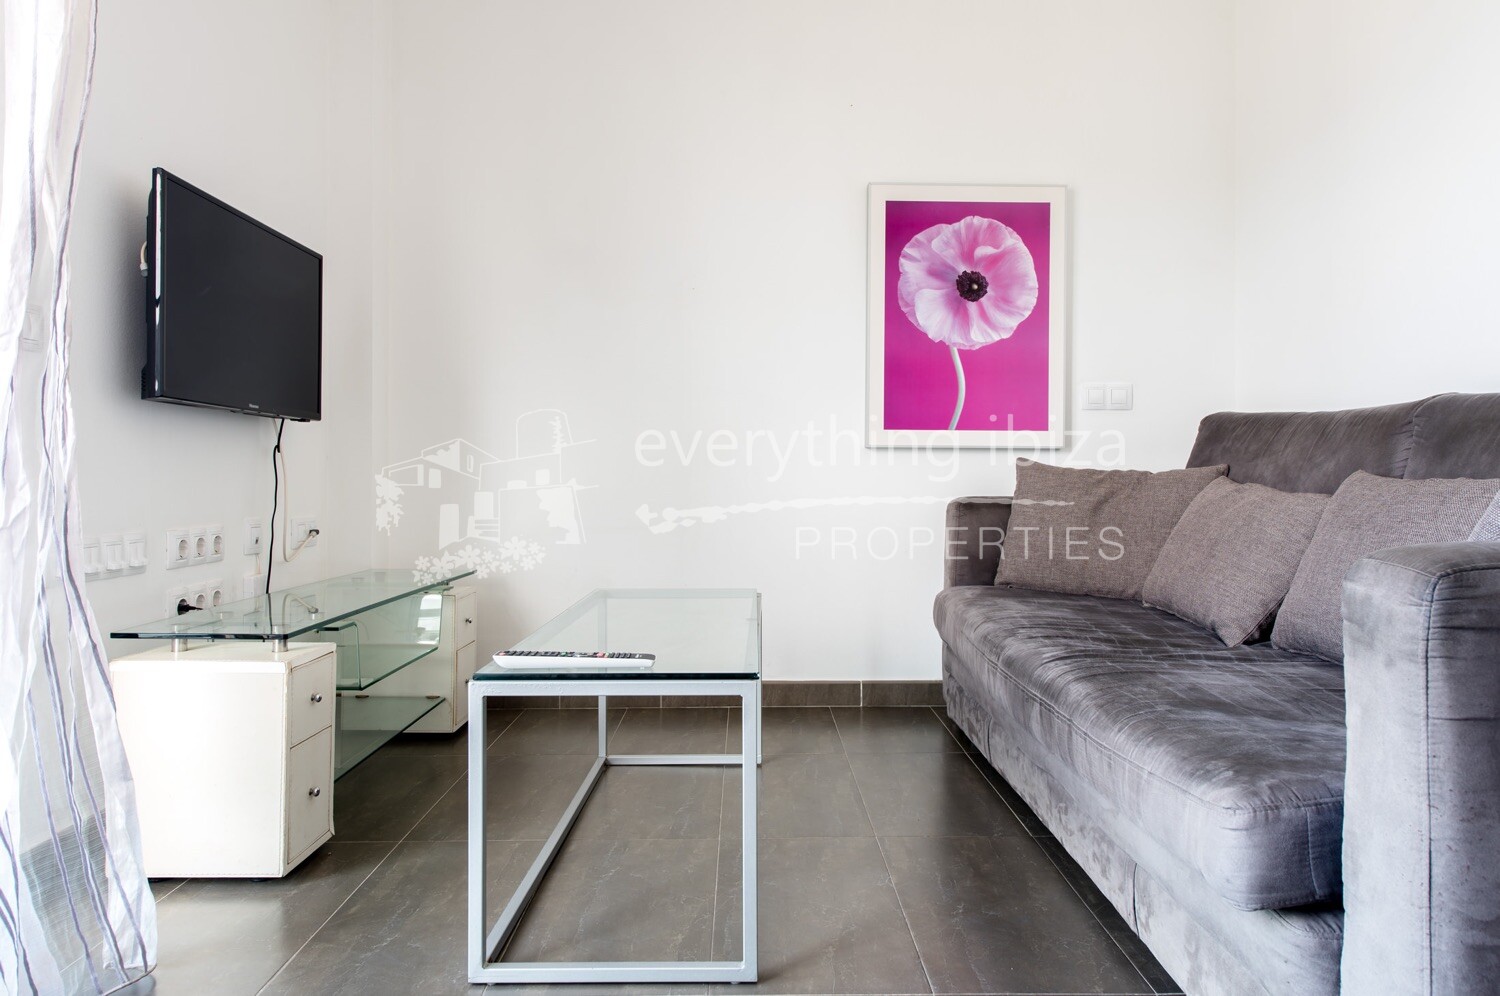 Contemporary Apartments in Cosmopolitan Santa Eulalia, ref. 1404, for sale in Ibiza by everything ibiza Properties